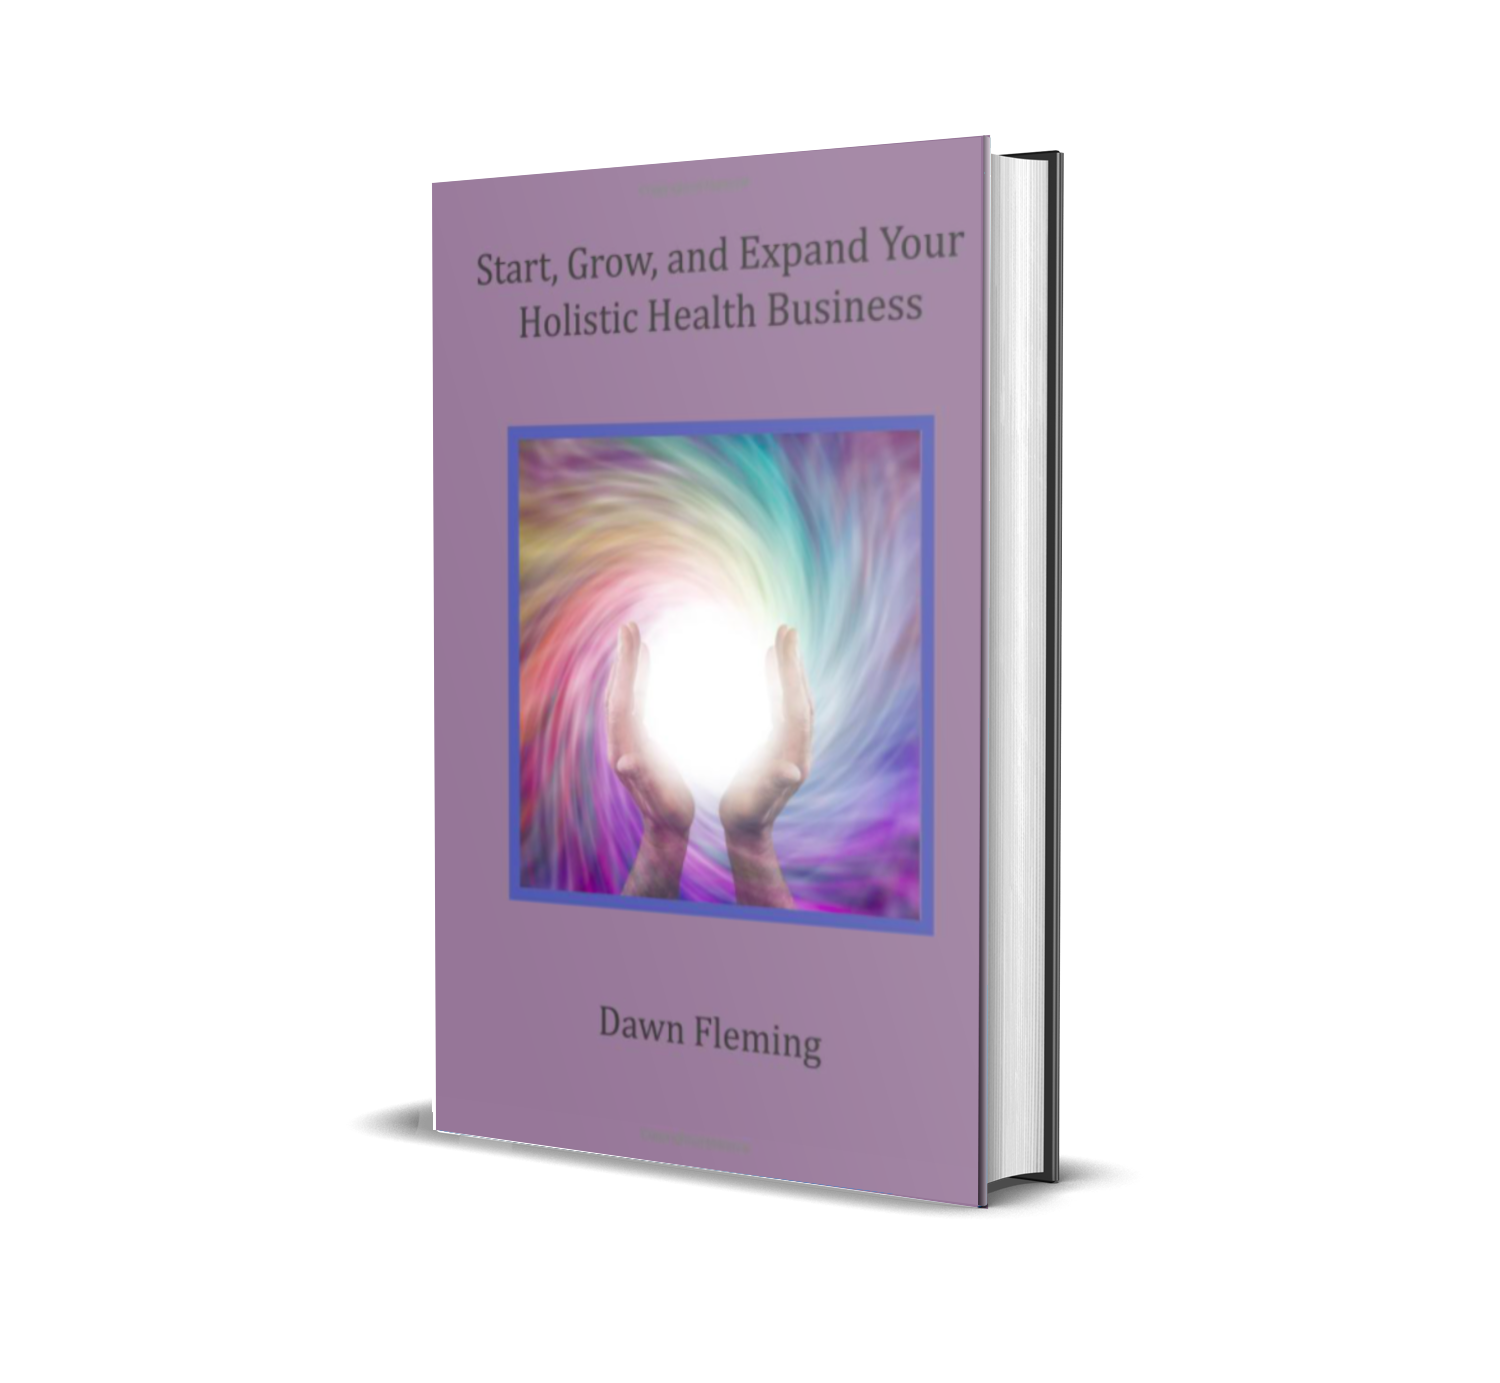 Start, Grow, and Expand Your Holistic Health Business